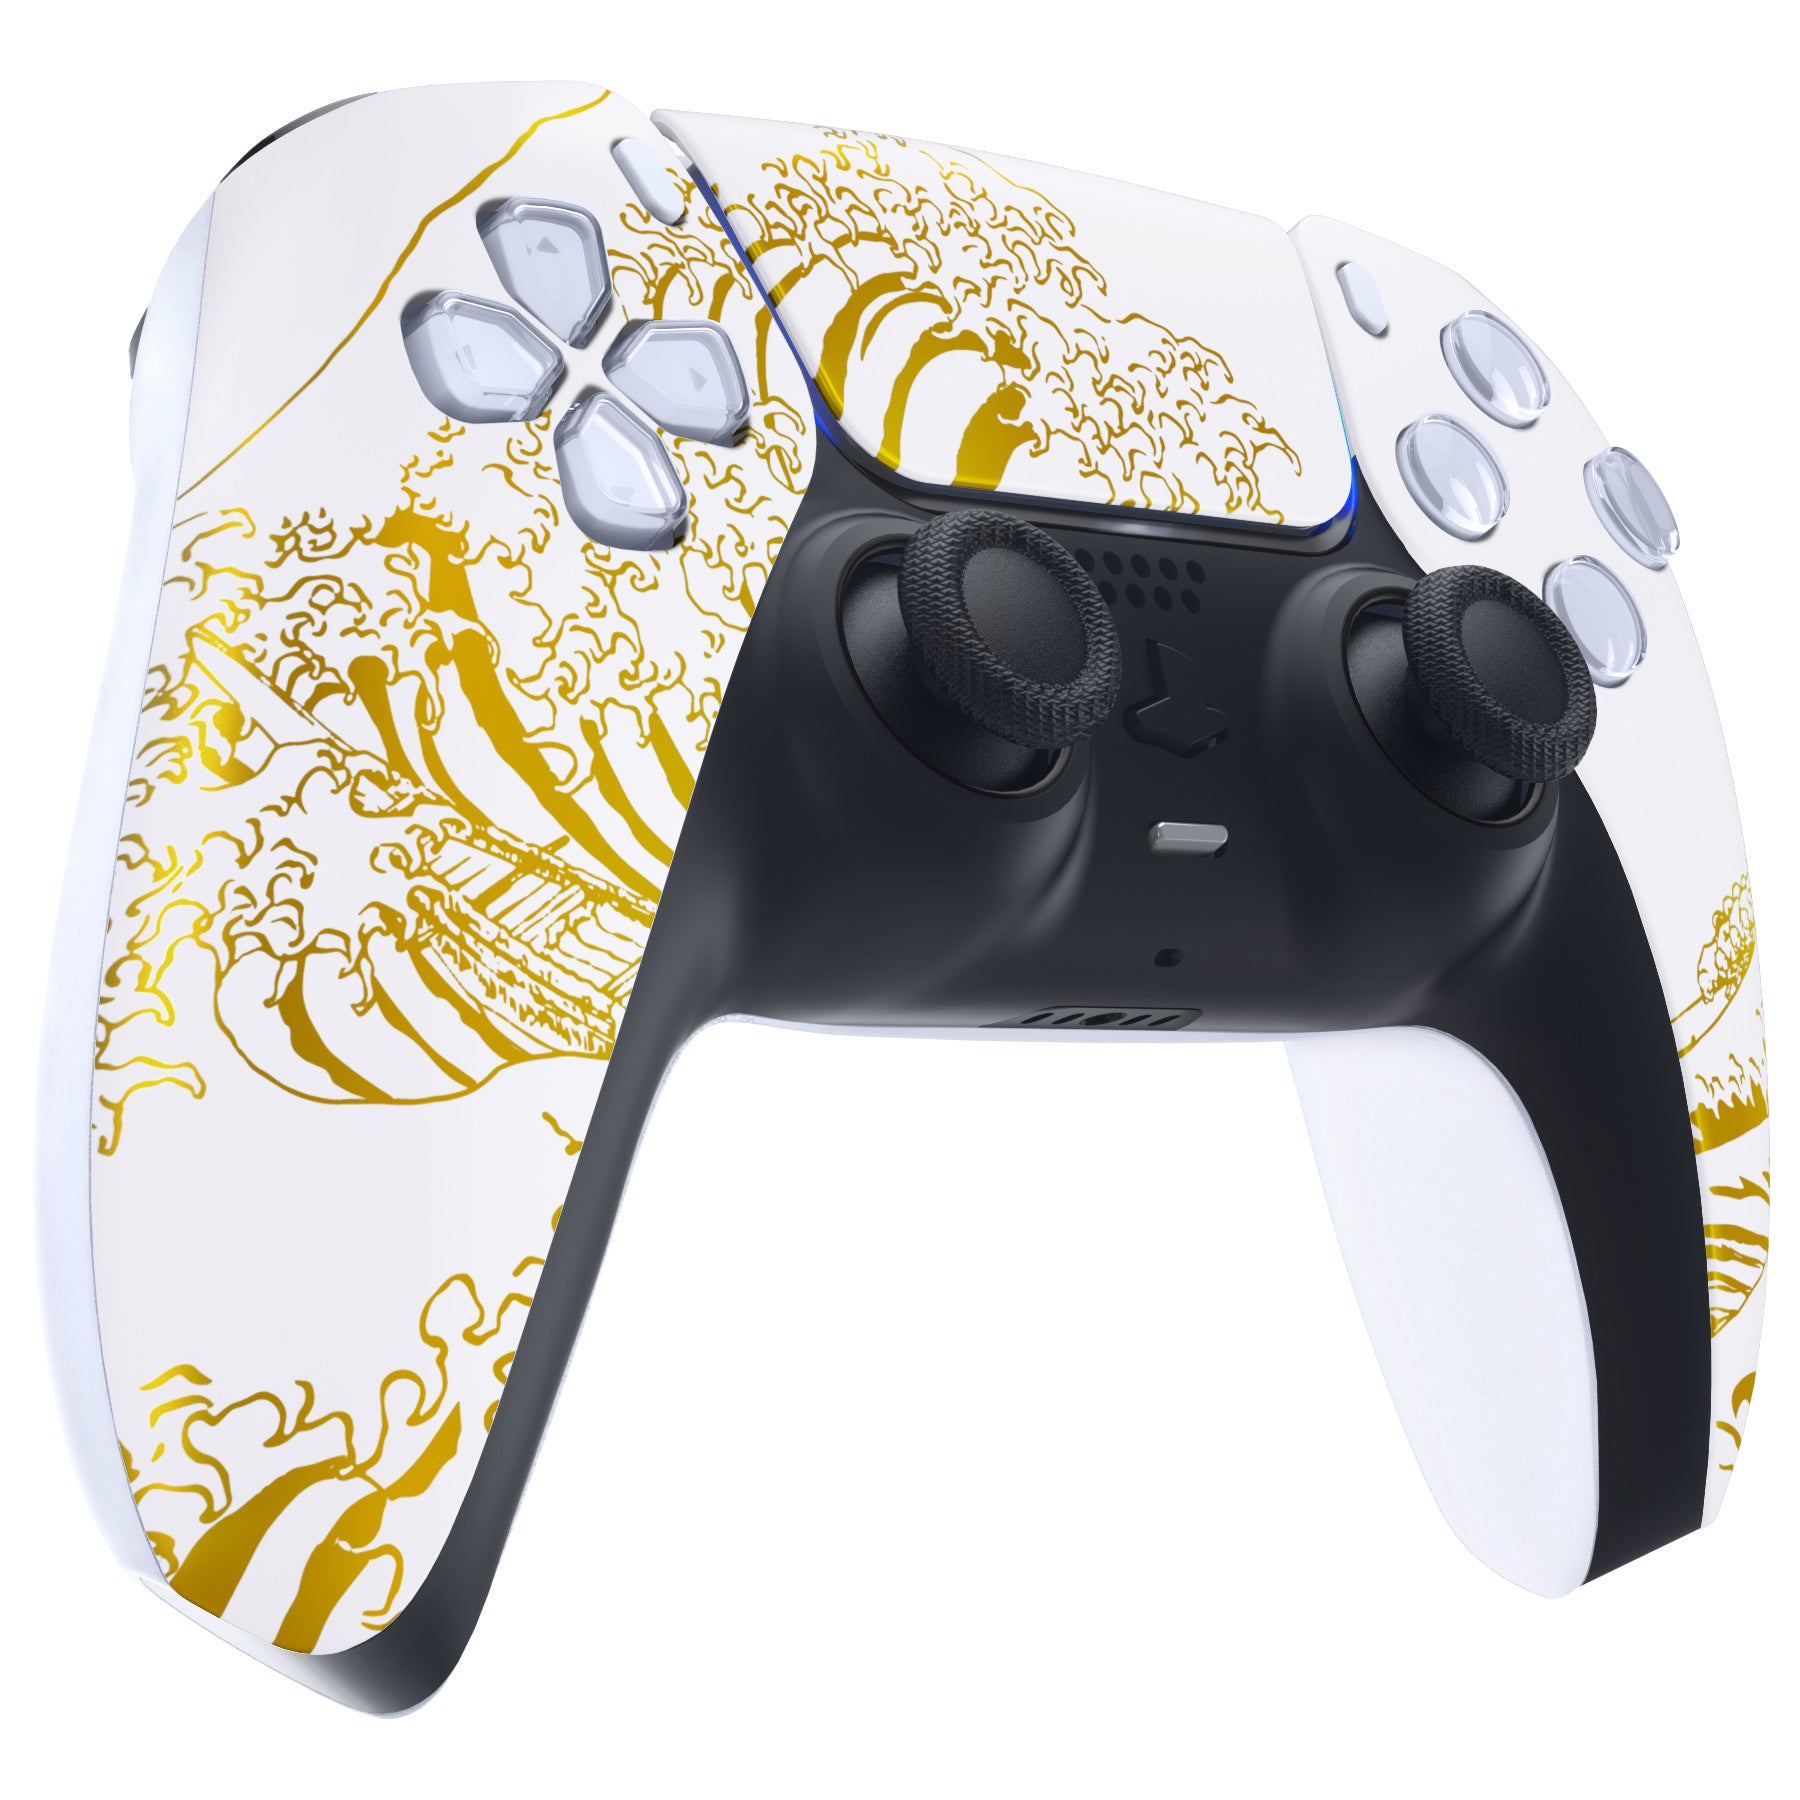 The Great GOLDEN Wave Off Kanagawa - White Front Shell With Touchpad  Compatible With PS5 Controller BDM-010 & BDM-020 & BDM-030 & BDM-040 - 